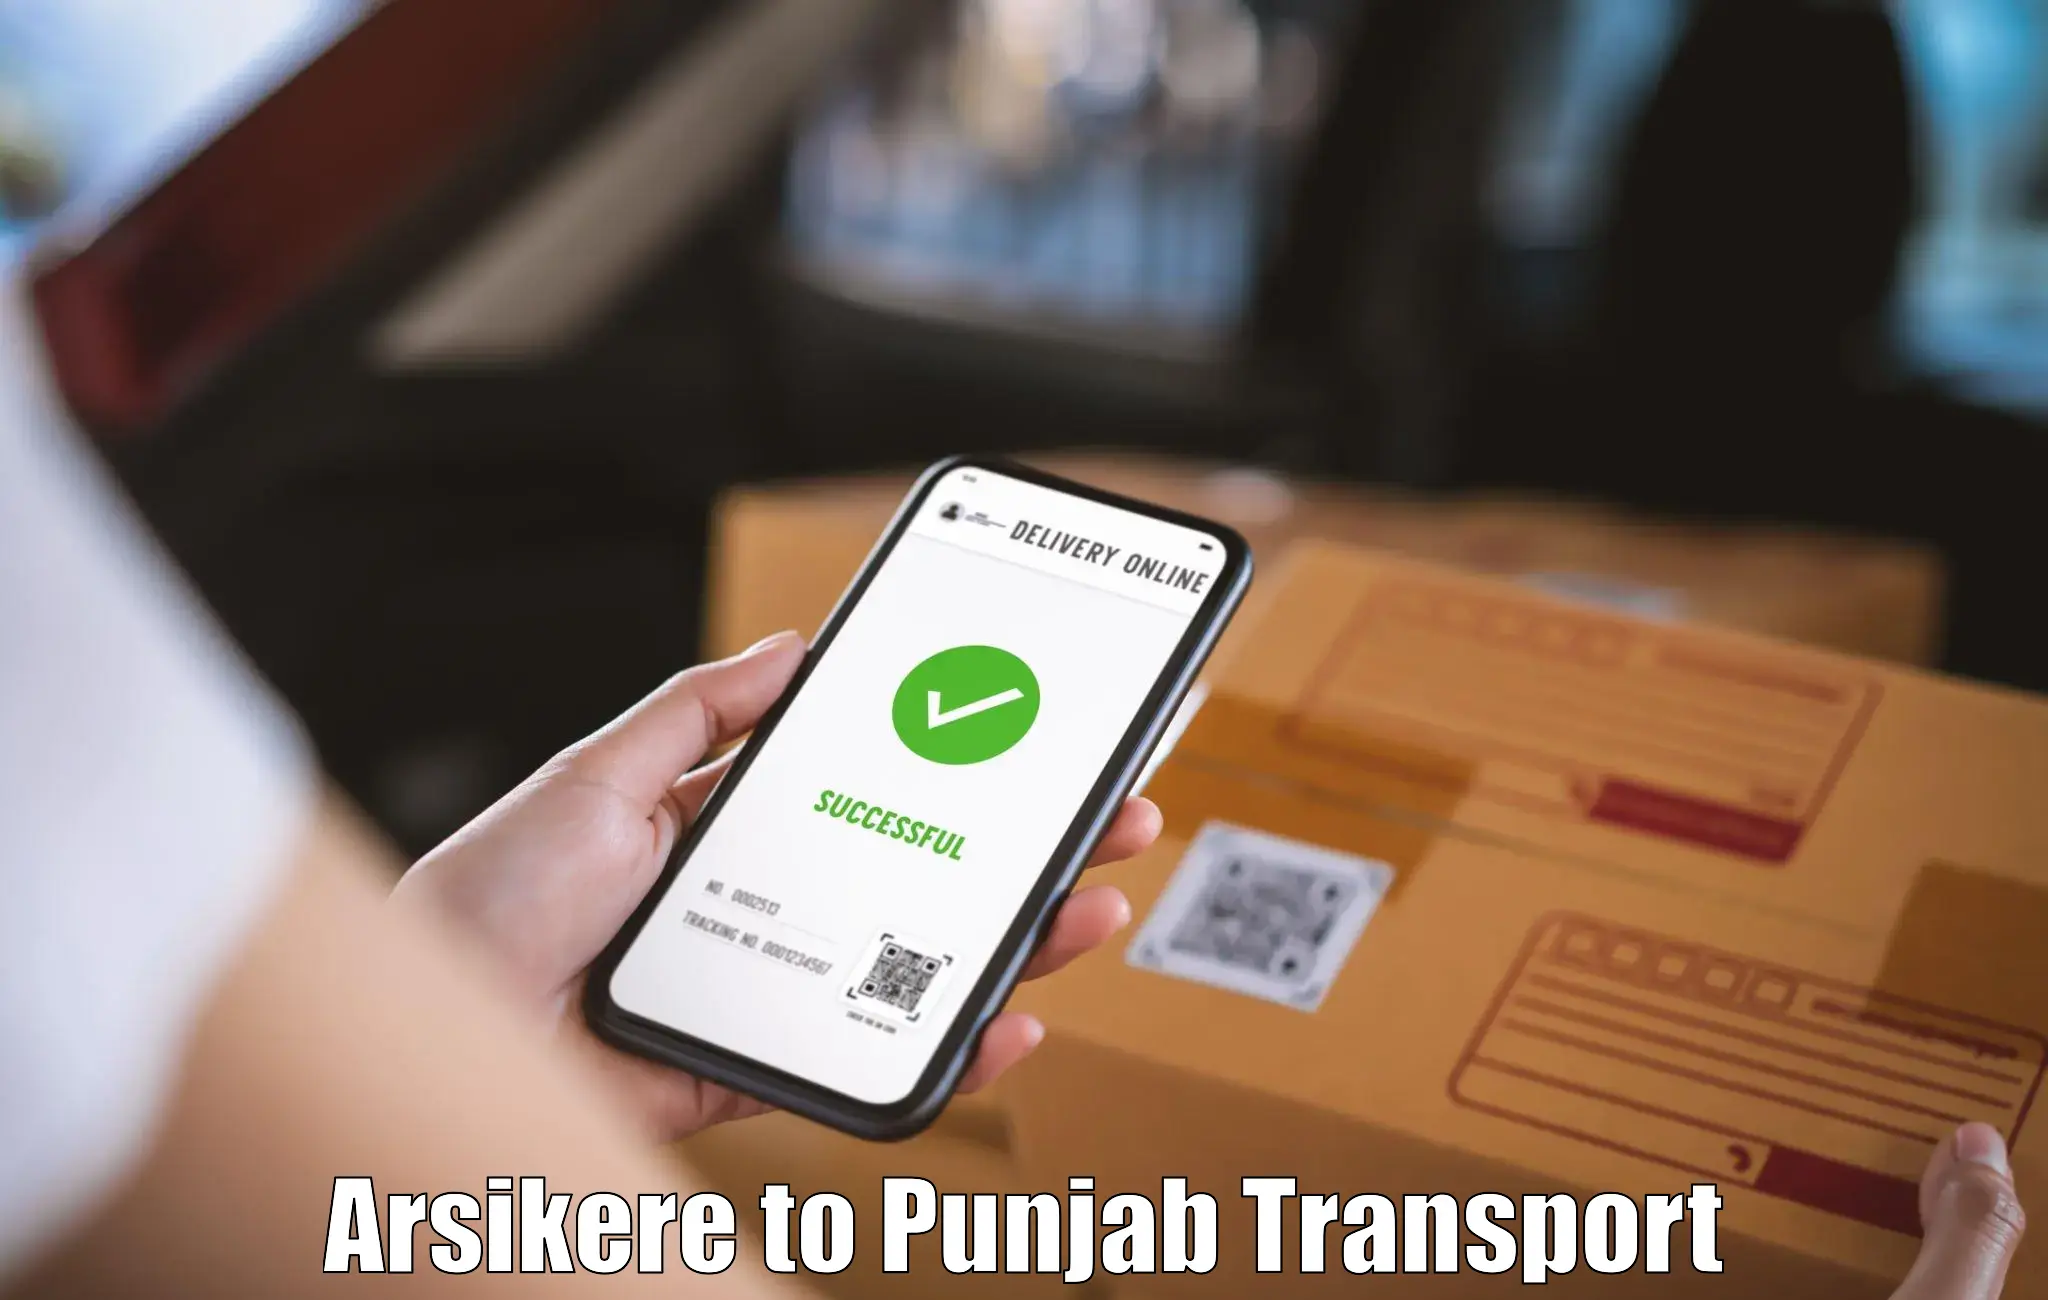 Express transport services Arsikere to Faridkot